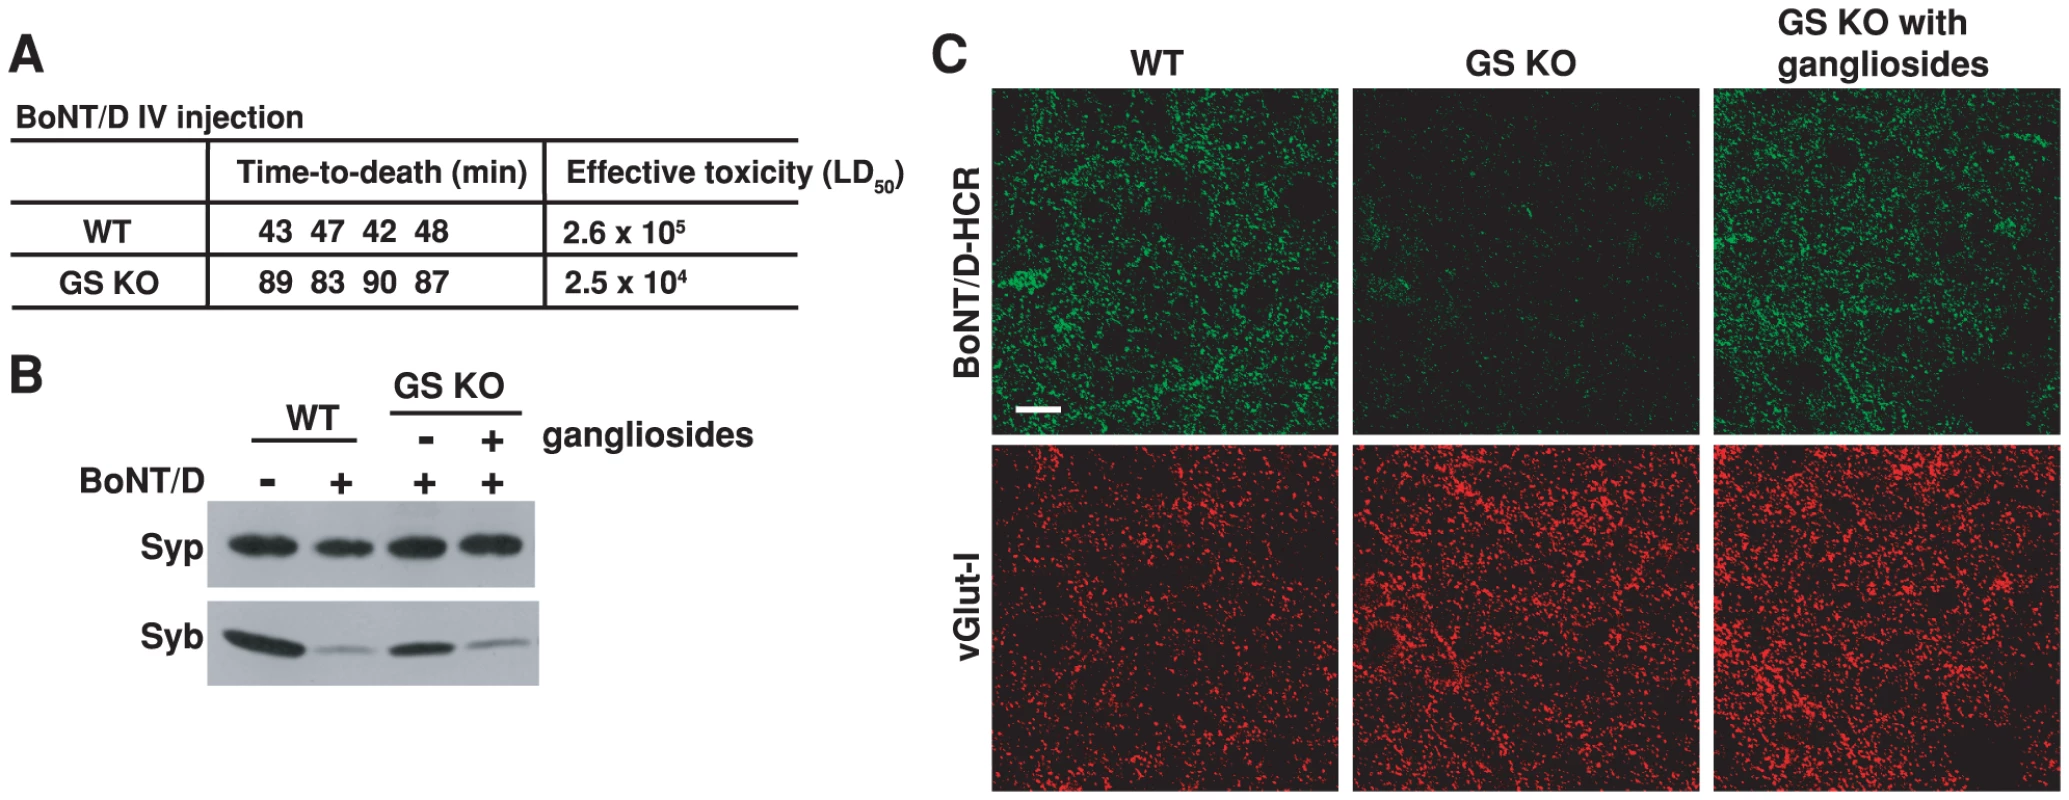 PSG are essential for the binding and entry of BoNT/D into neurons.